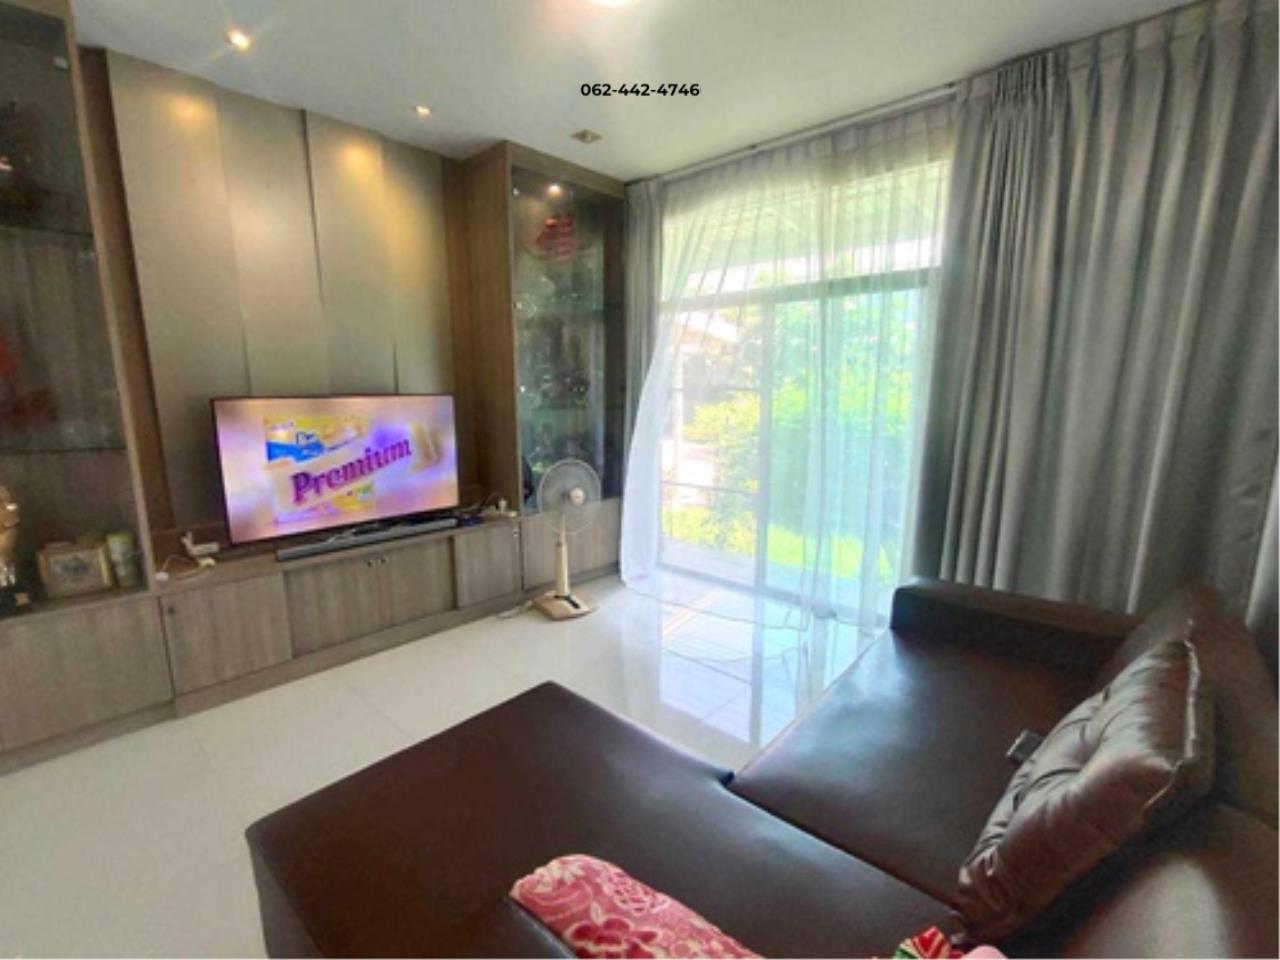 PPH_01050 House for sale Perfect Place Rangsit 1, ภาพที่ 4